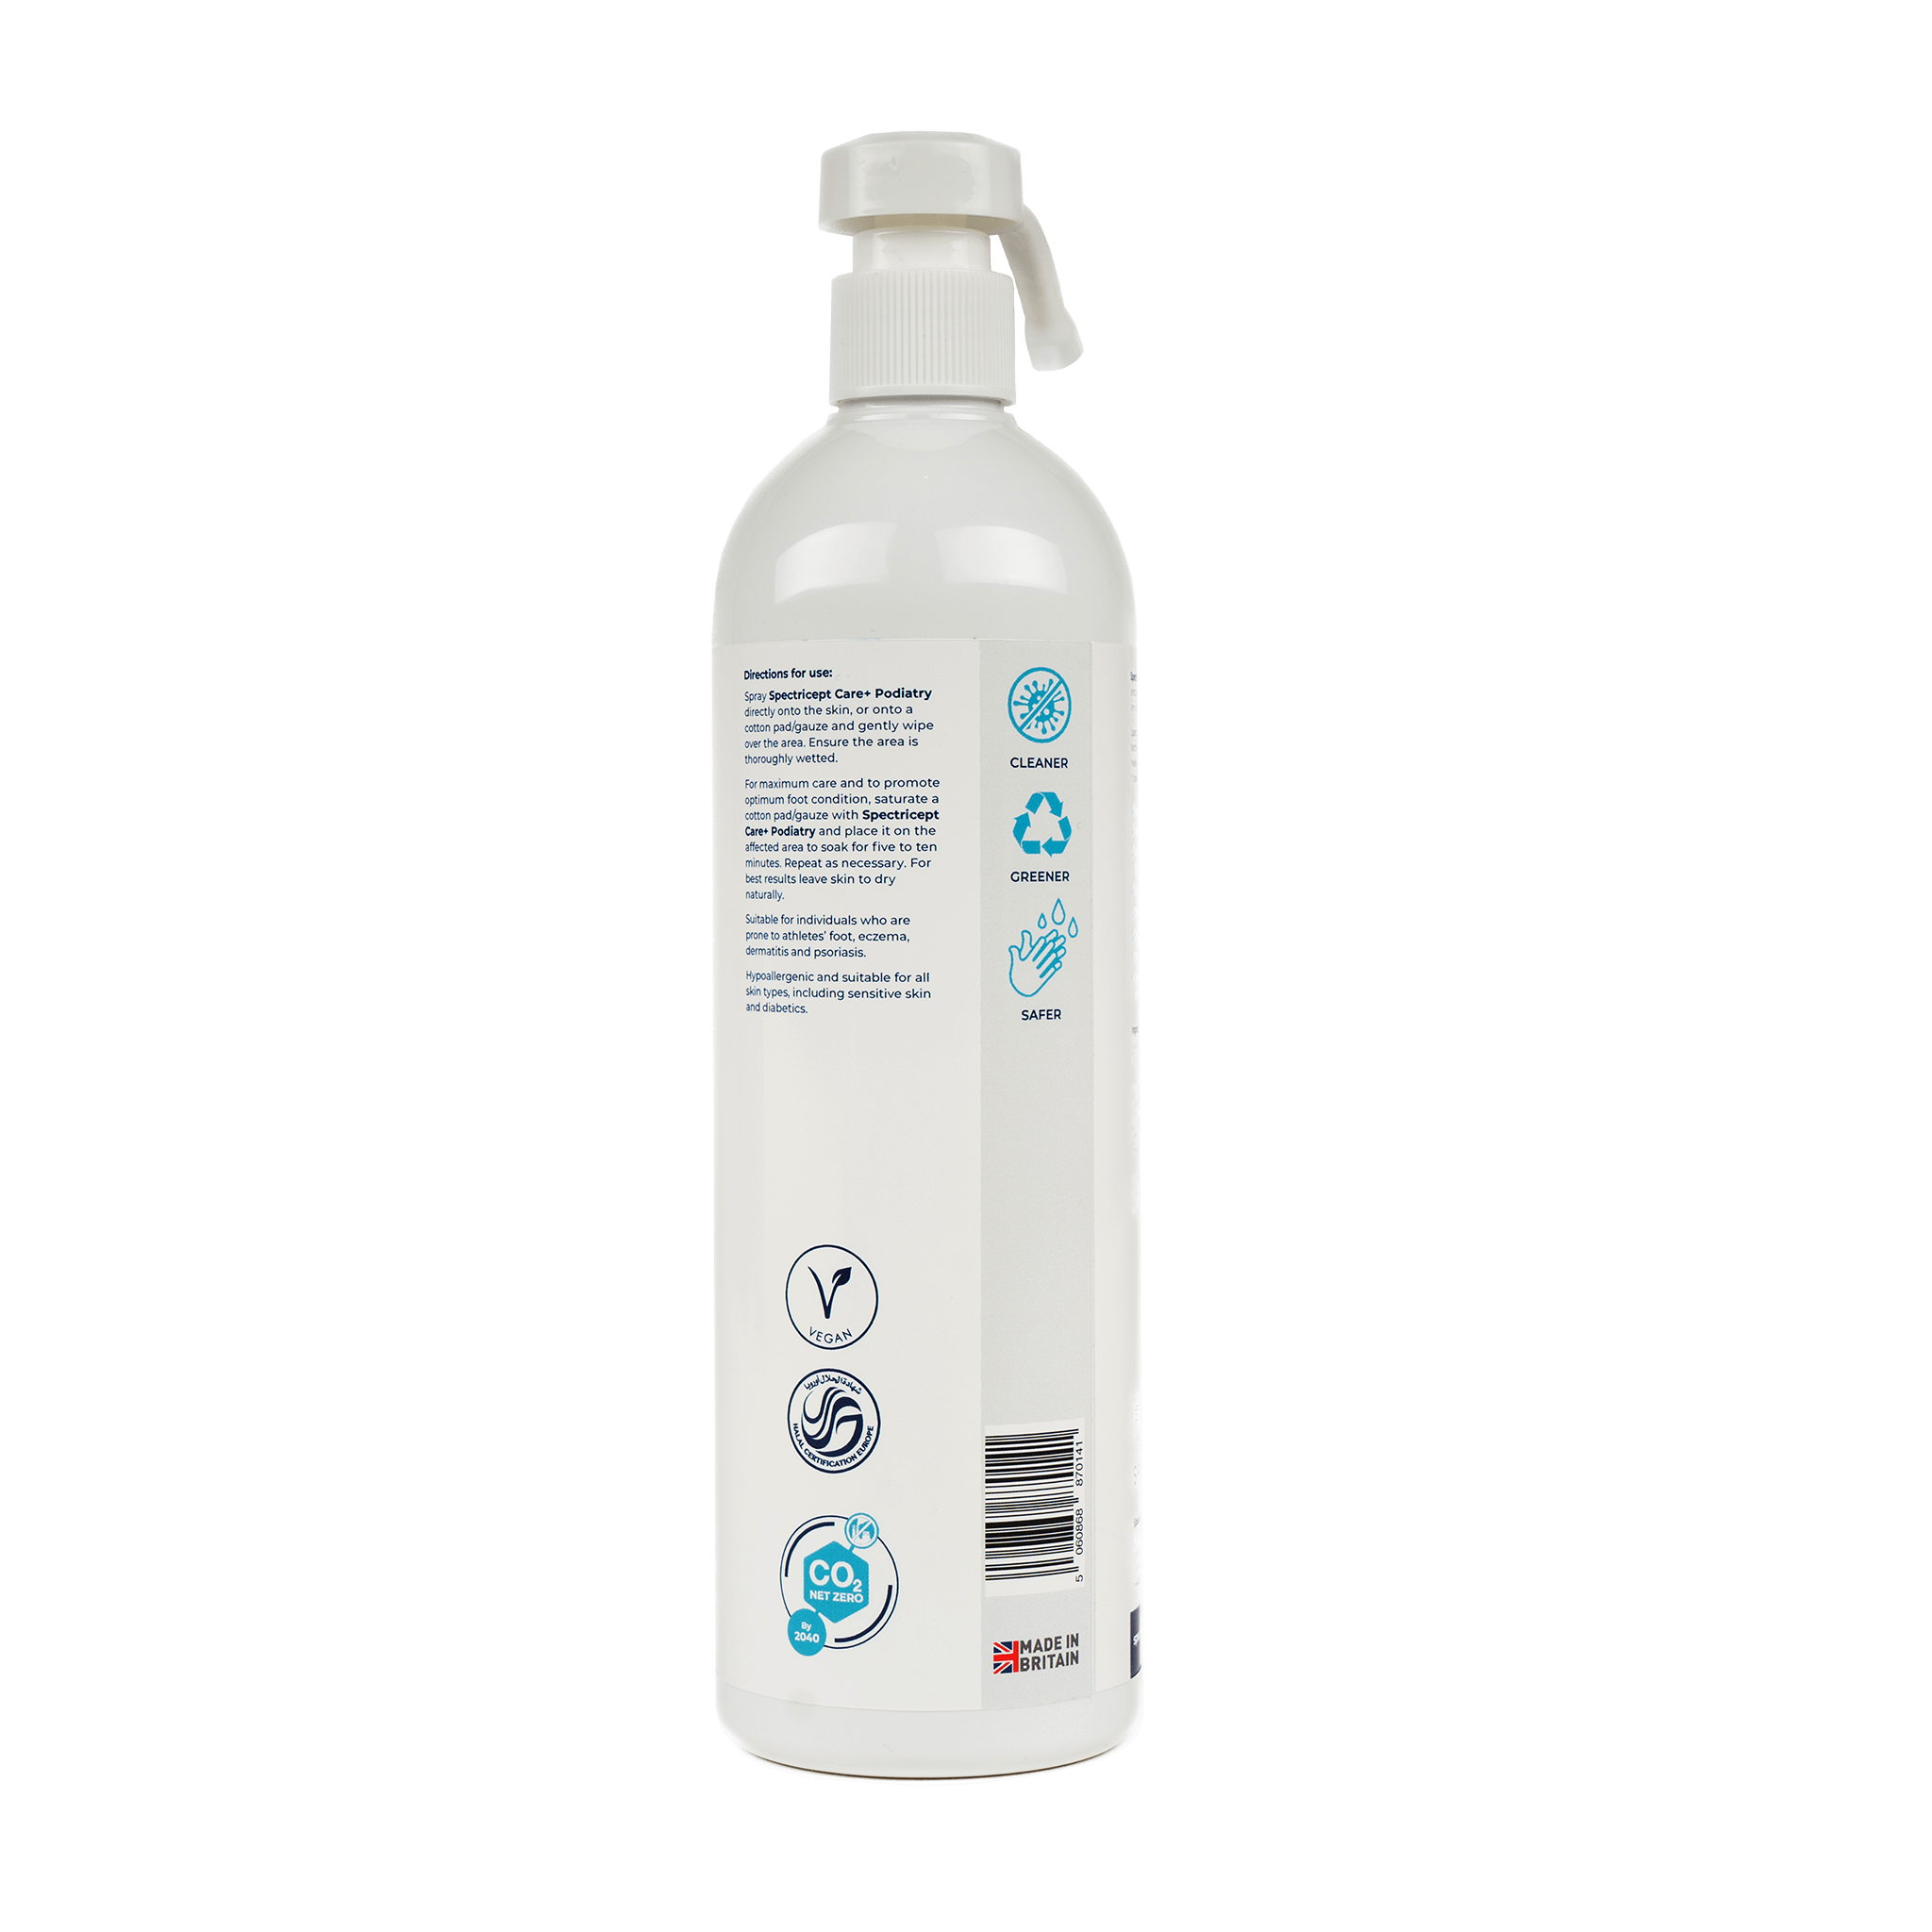 Spectricept™ CARE+ Professional PODIATRY 500ml